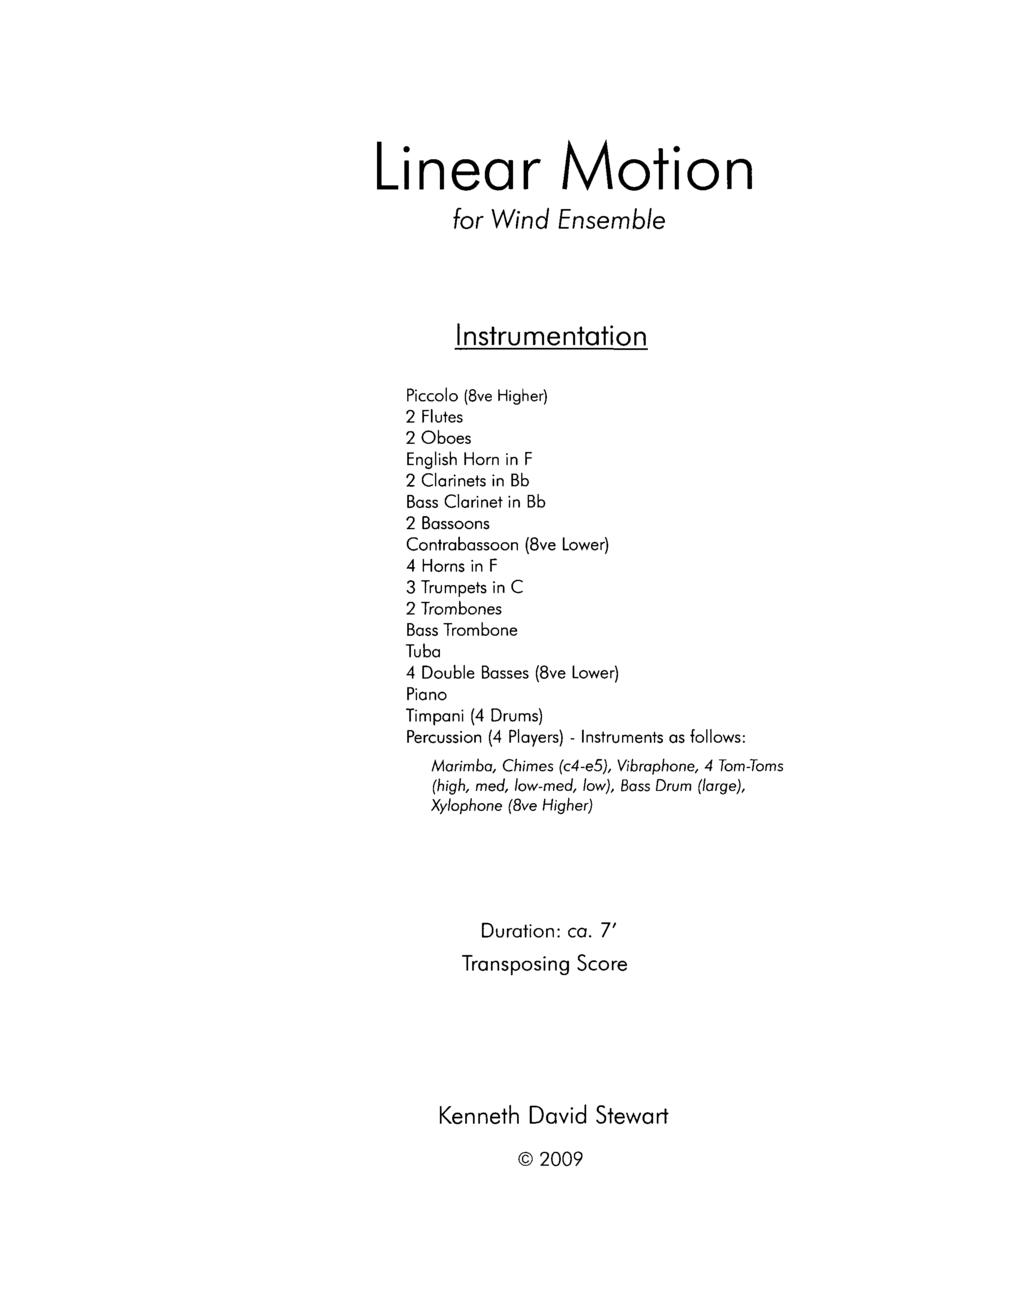 Linear Motion for Wind Ensemble Instrumentation Piccolo (8ve Higher) 2 Flutes 2 Oboes English Horn in F 2 Clarinets in Bb Bass Clarinet in Bb 2 Bassoons Contrabassoon (8ve Lower) 4 Horns in F 3